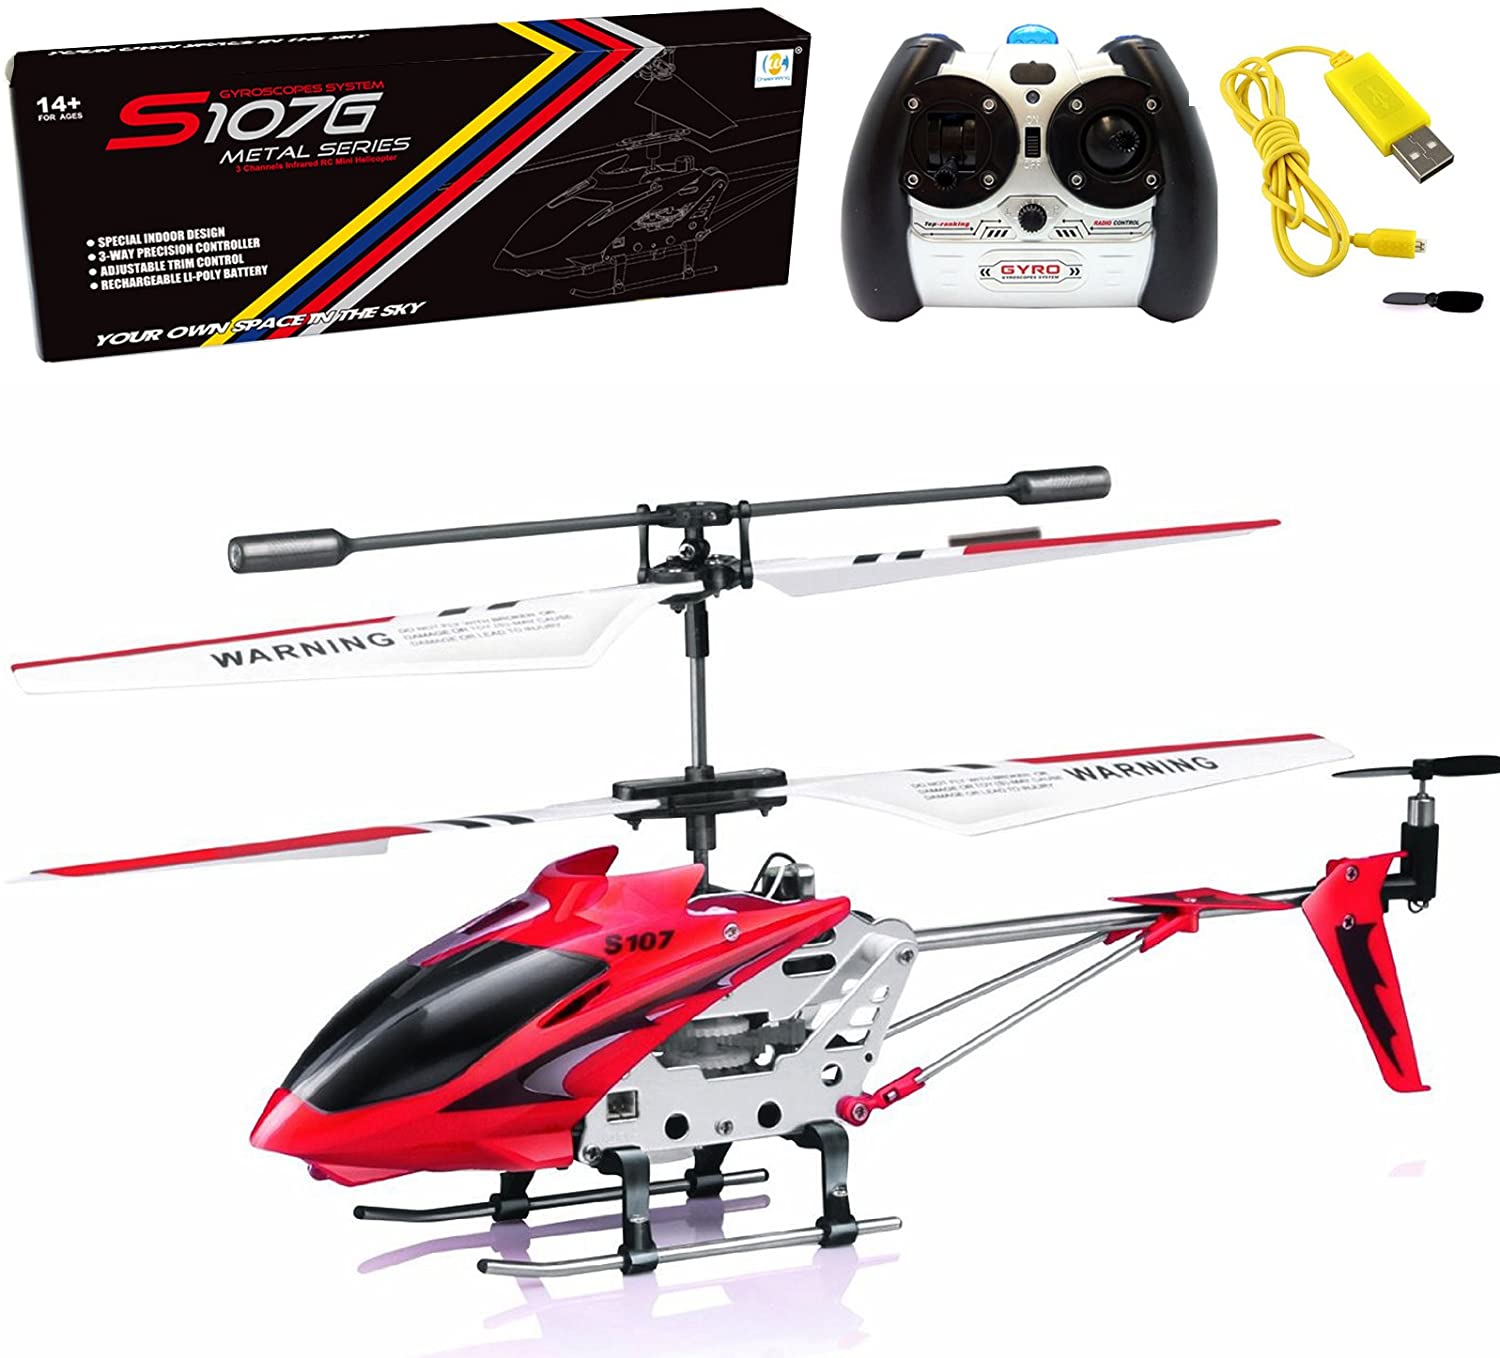 Cheerwing Phantom 3.5 Channel Mini RC Helicopter S107/S107G